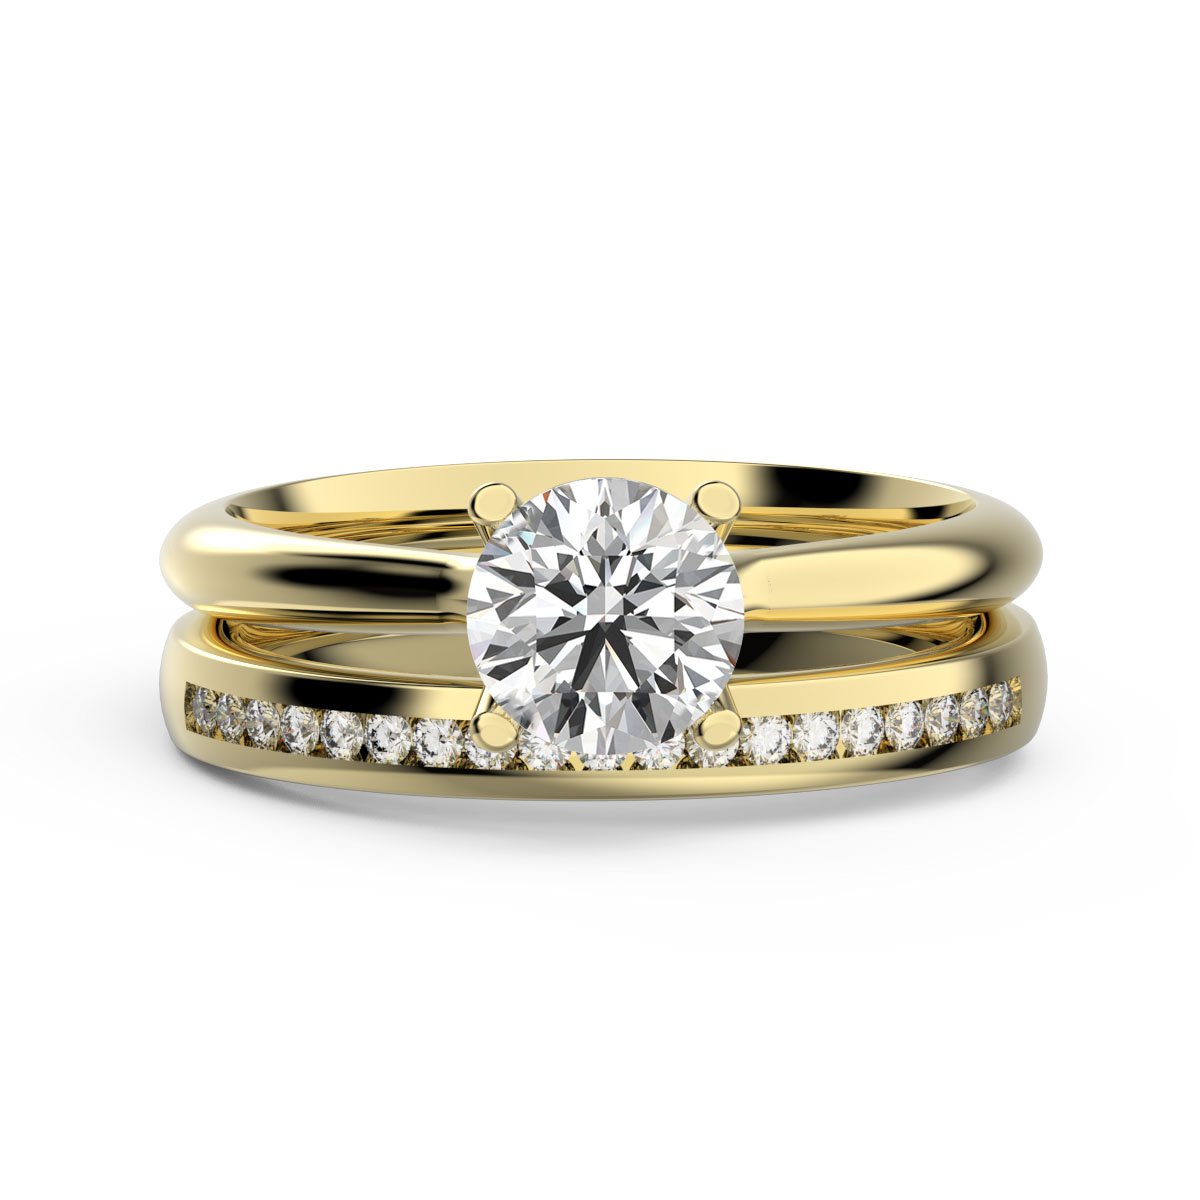 How to Wear Your Wedding Ring Set | Frank Jewelers Blog